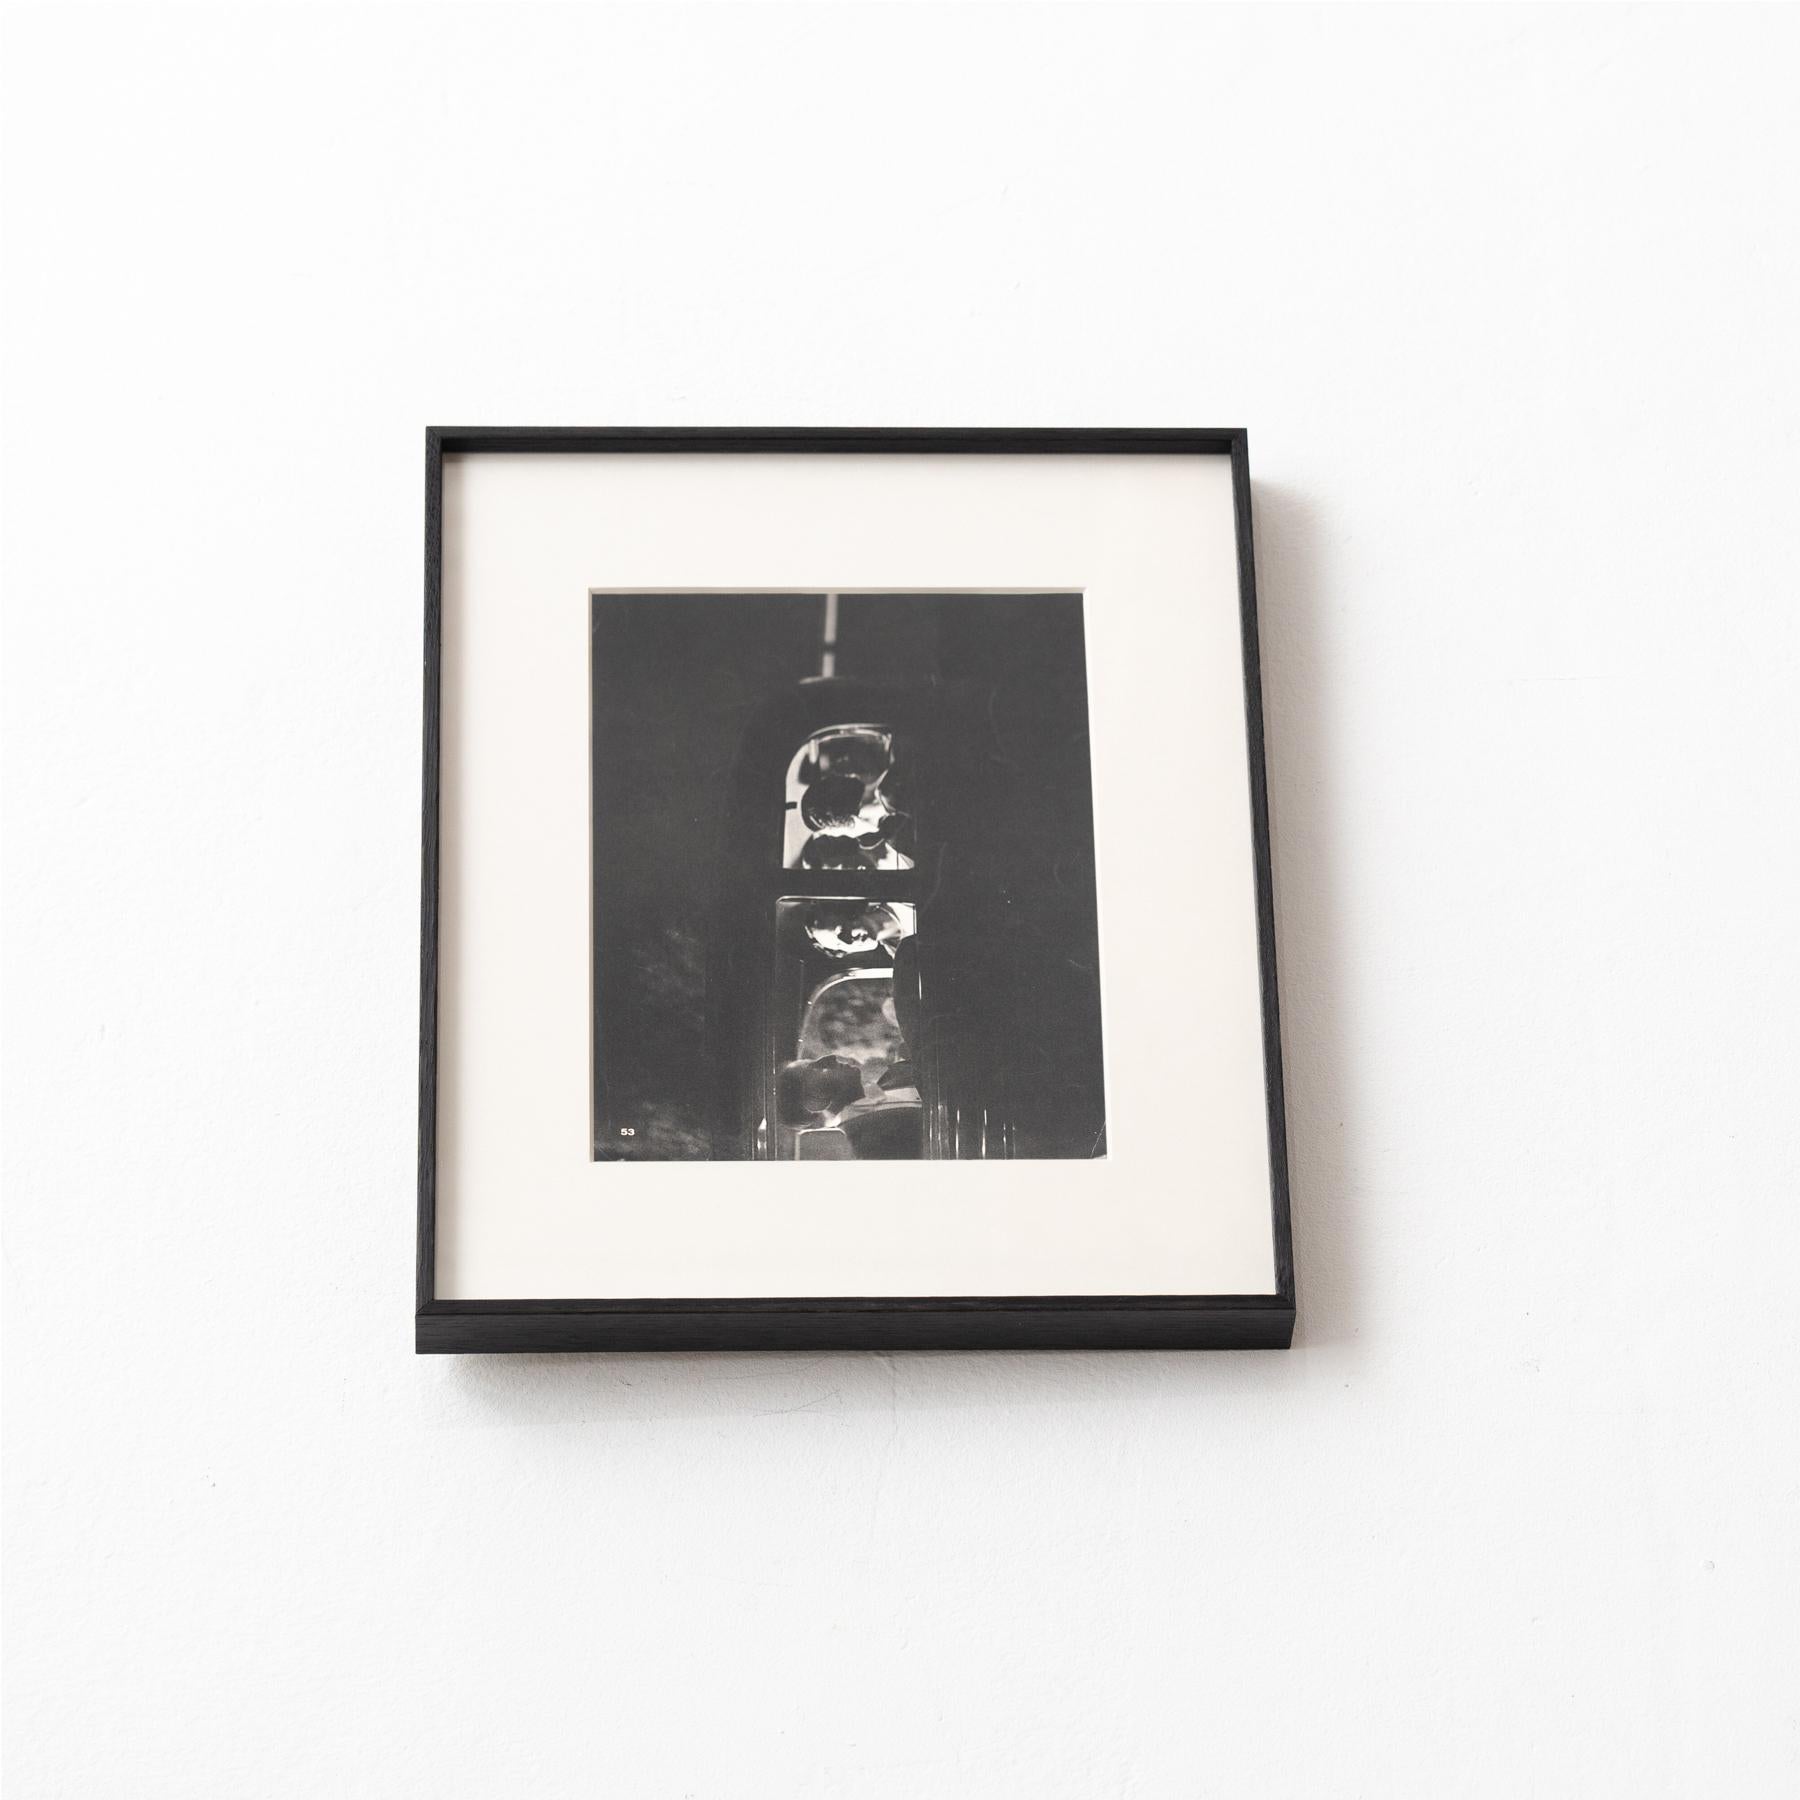 Brassai Rare Black And White Framed Photography, circa 1930 In Good Condition For Sale In Barcelona, Barcelona